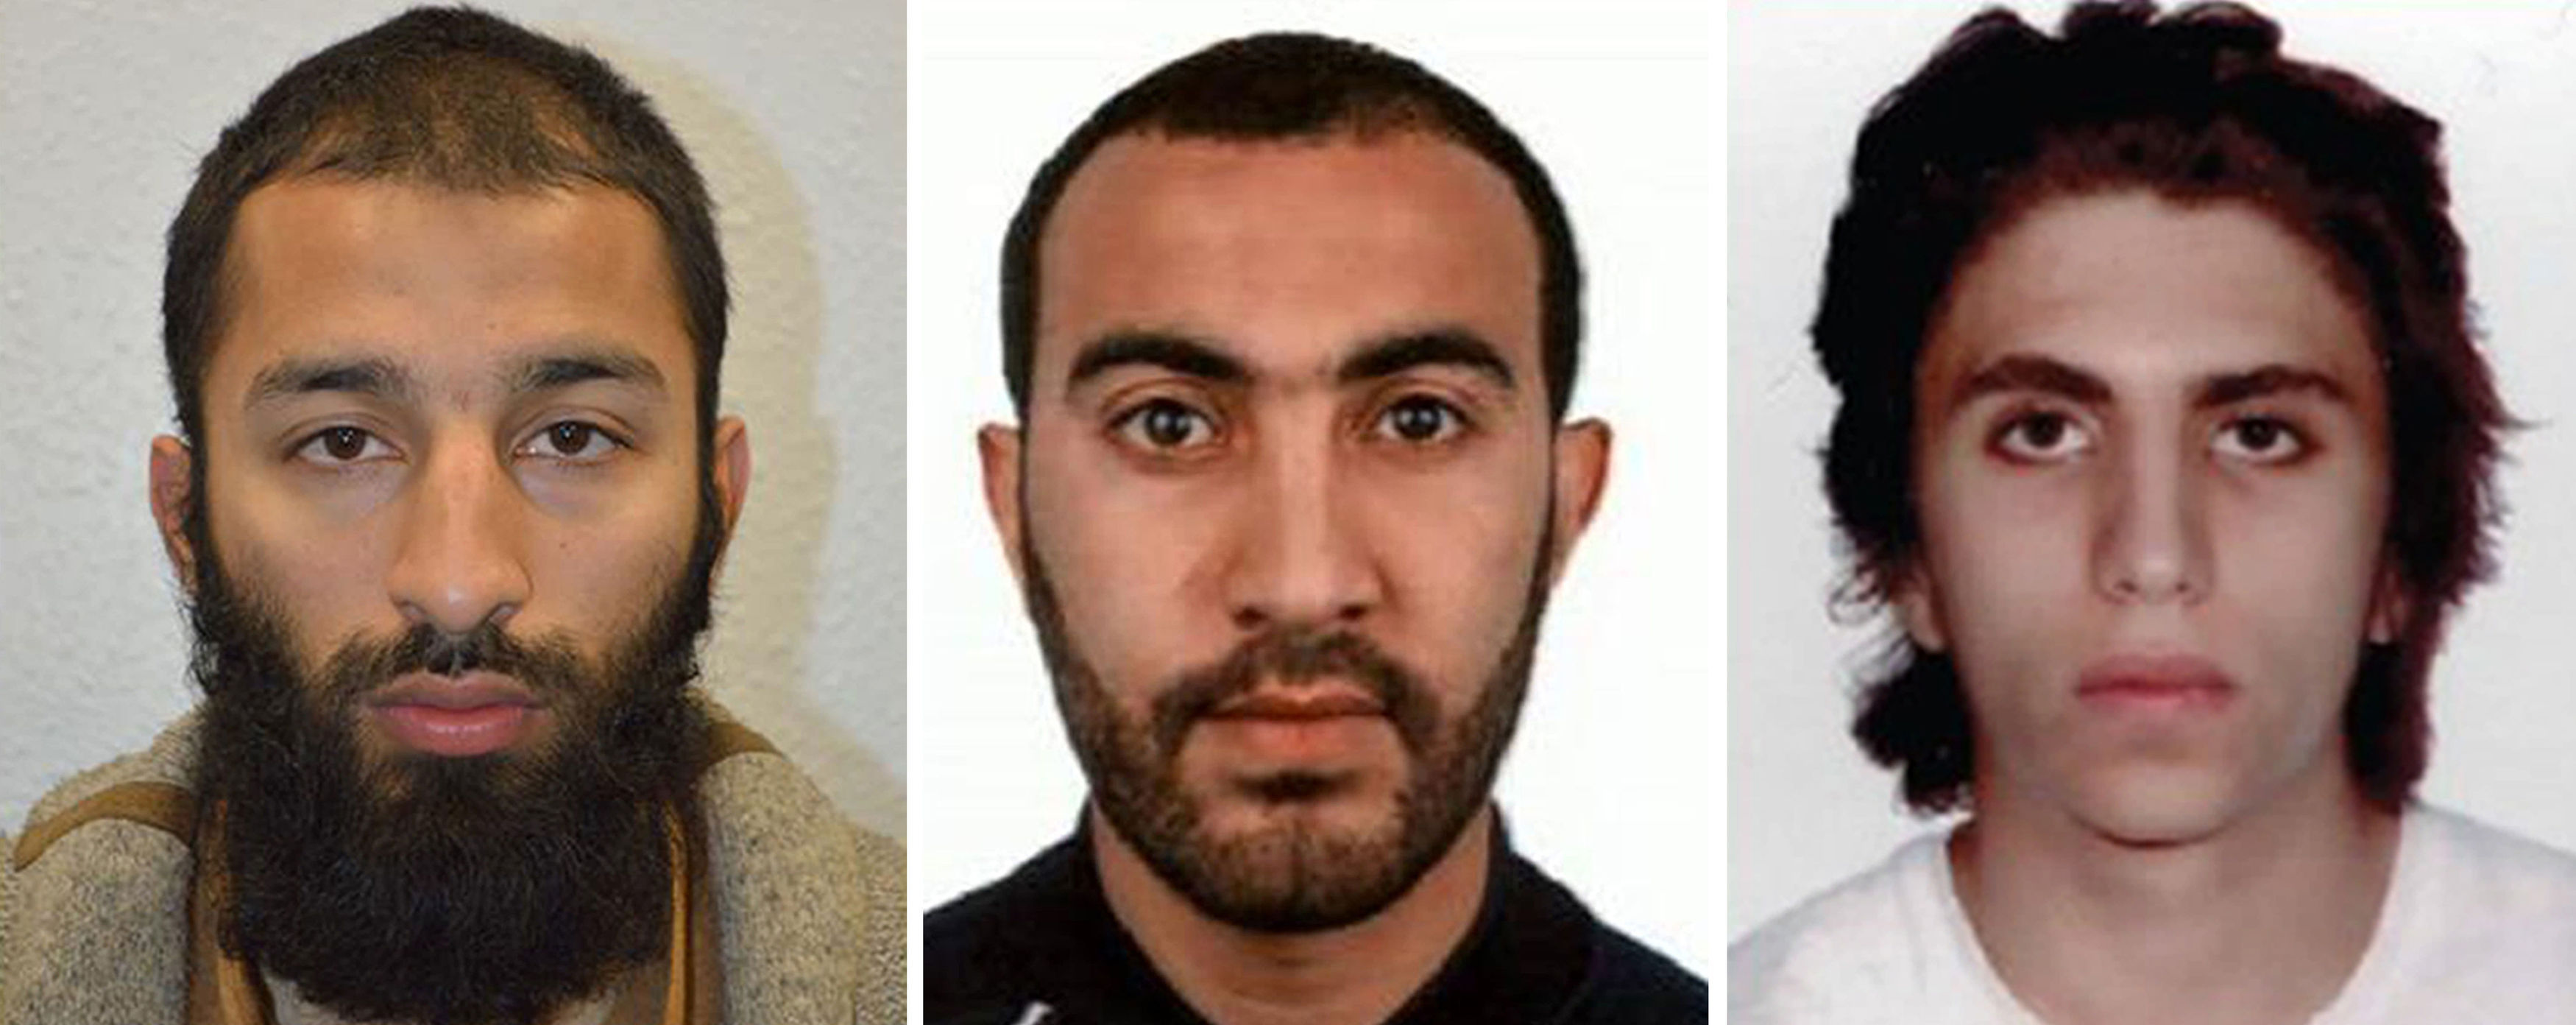 (Left to right) Khuram Shazad Butt, Rachid Redouane and Youssef Zaghba who have been named as the London Bridge terrorists. (Metropolitan Police/PA Wire)